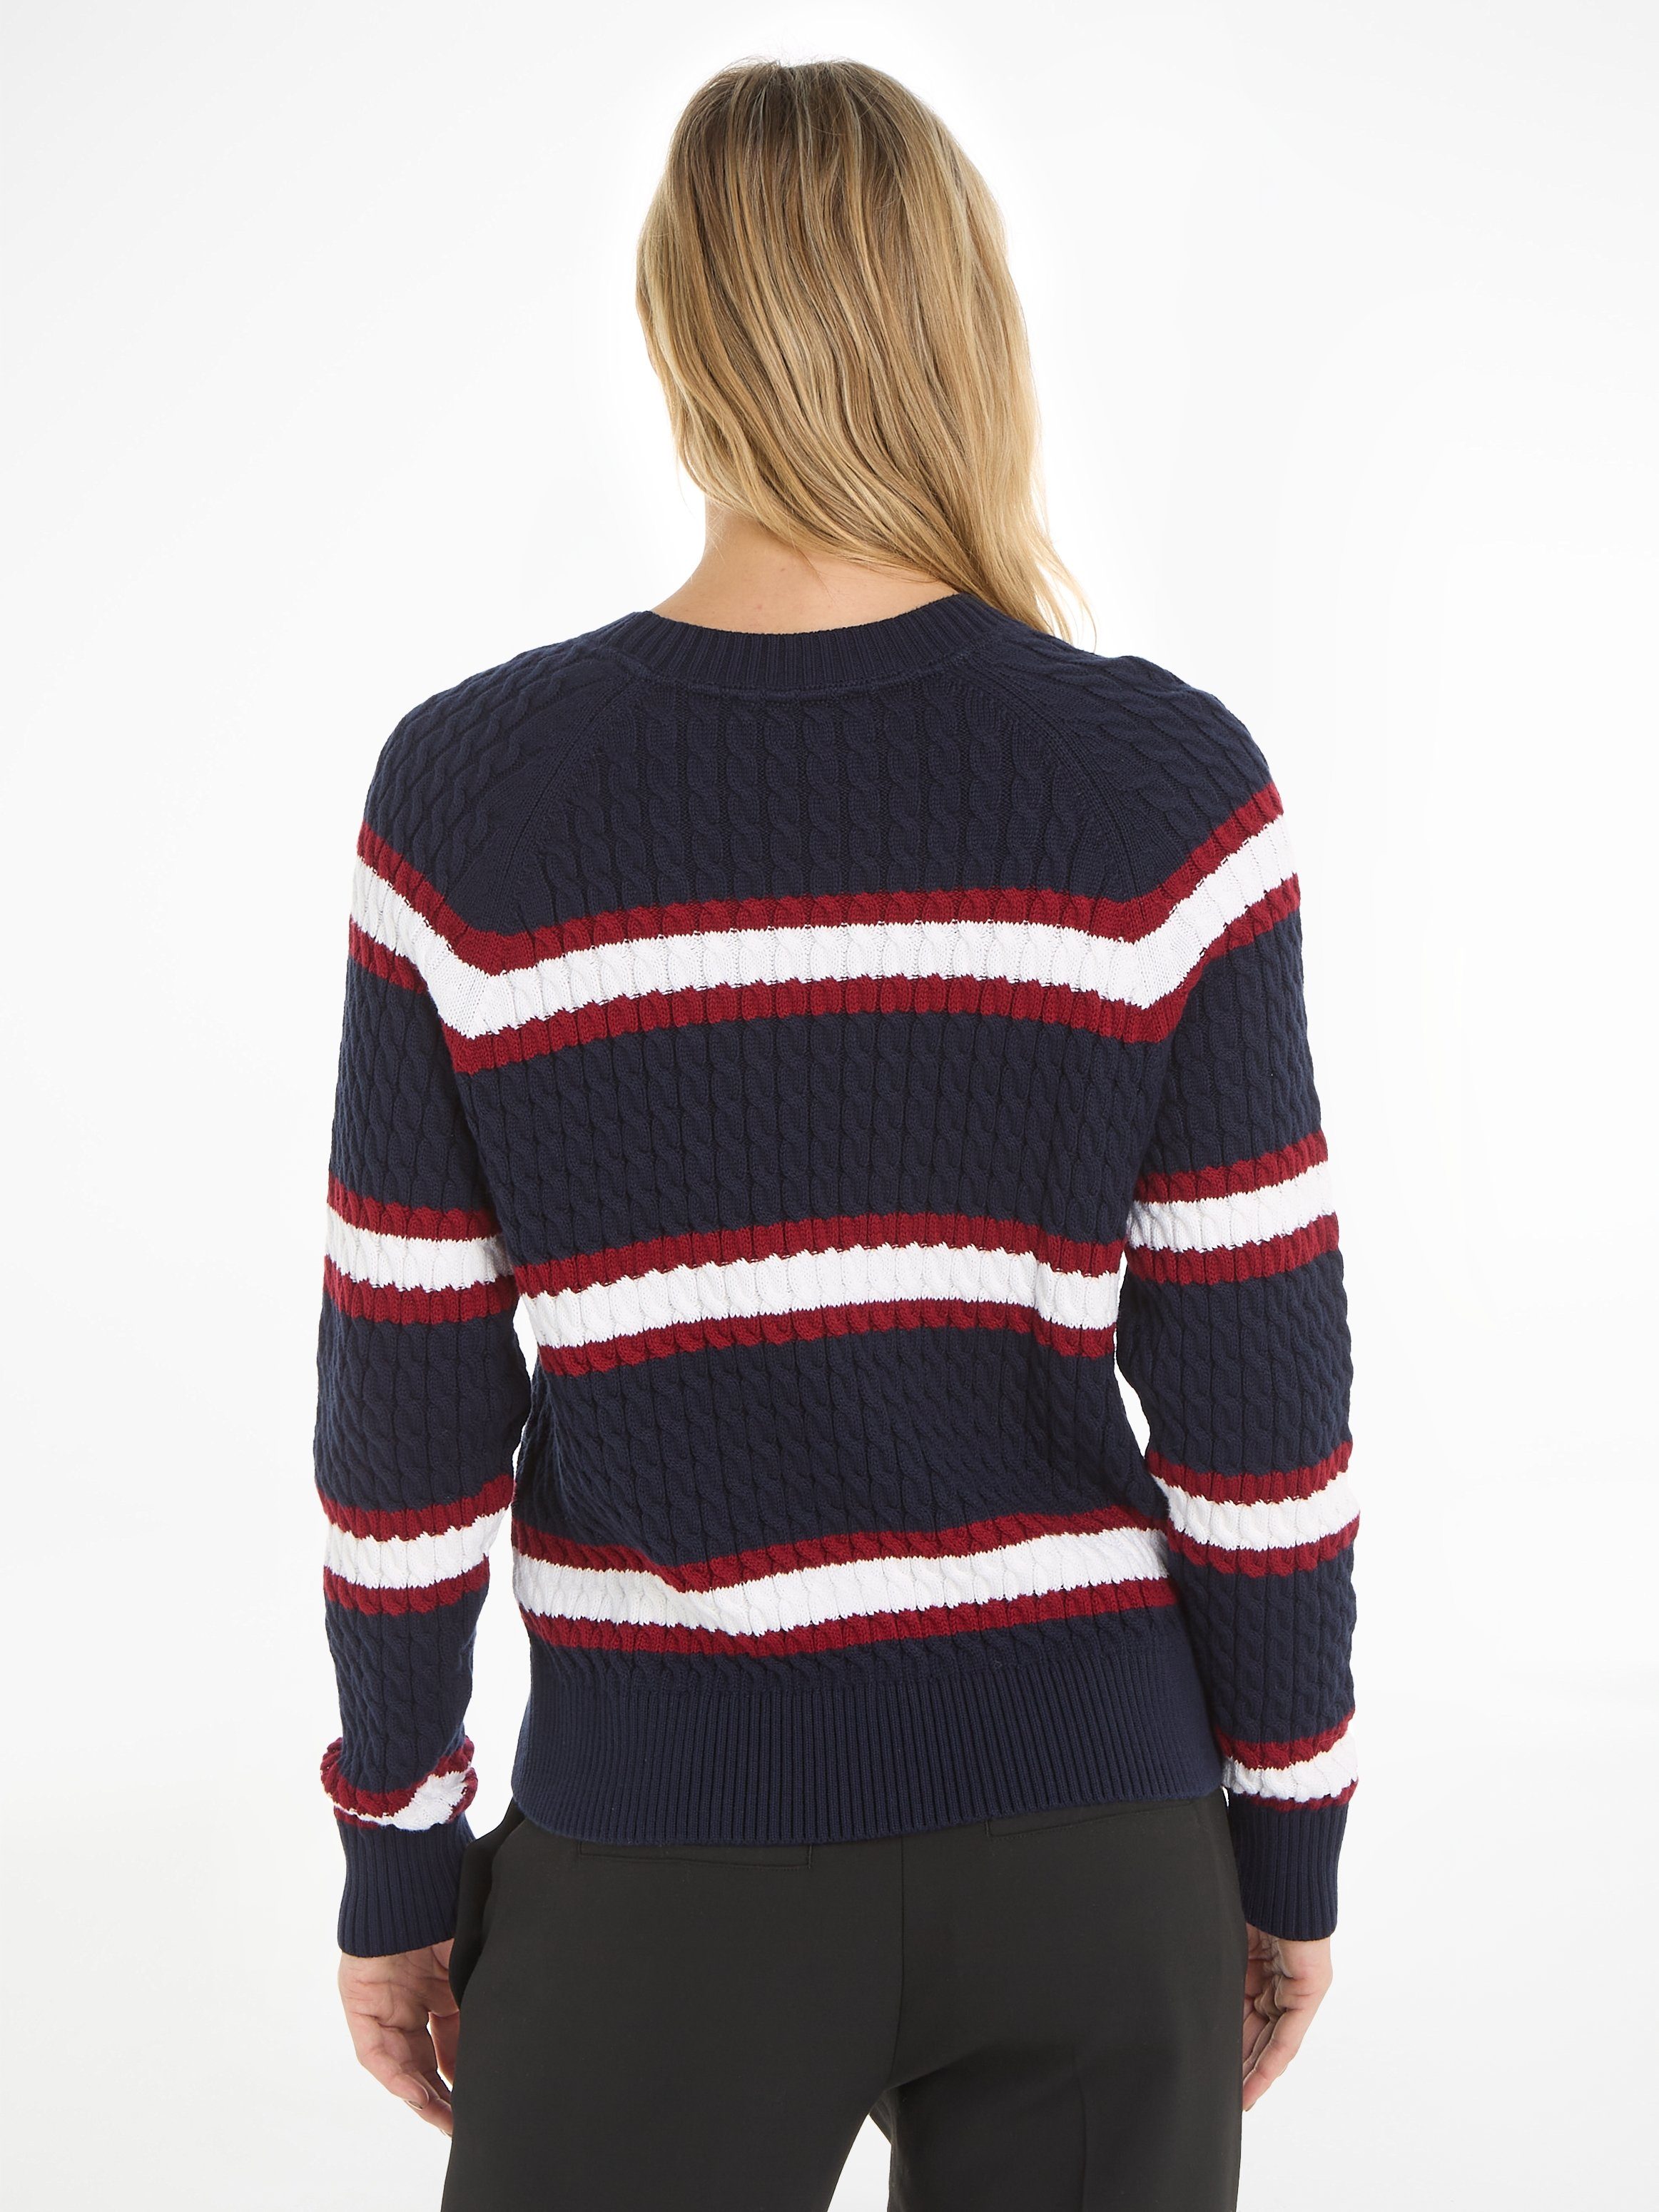 MINI Strickpullover Logostickerei SWEATER Tommy C-NECK Hilfiger CO CABLE mit